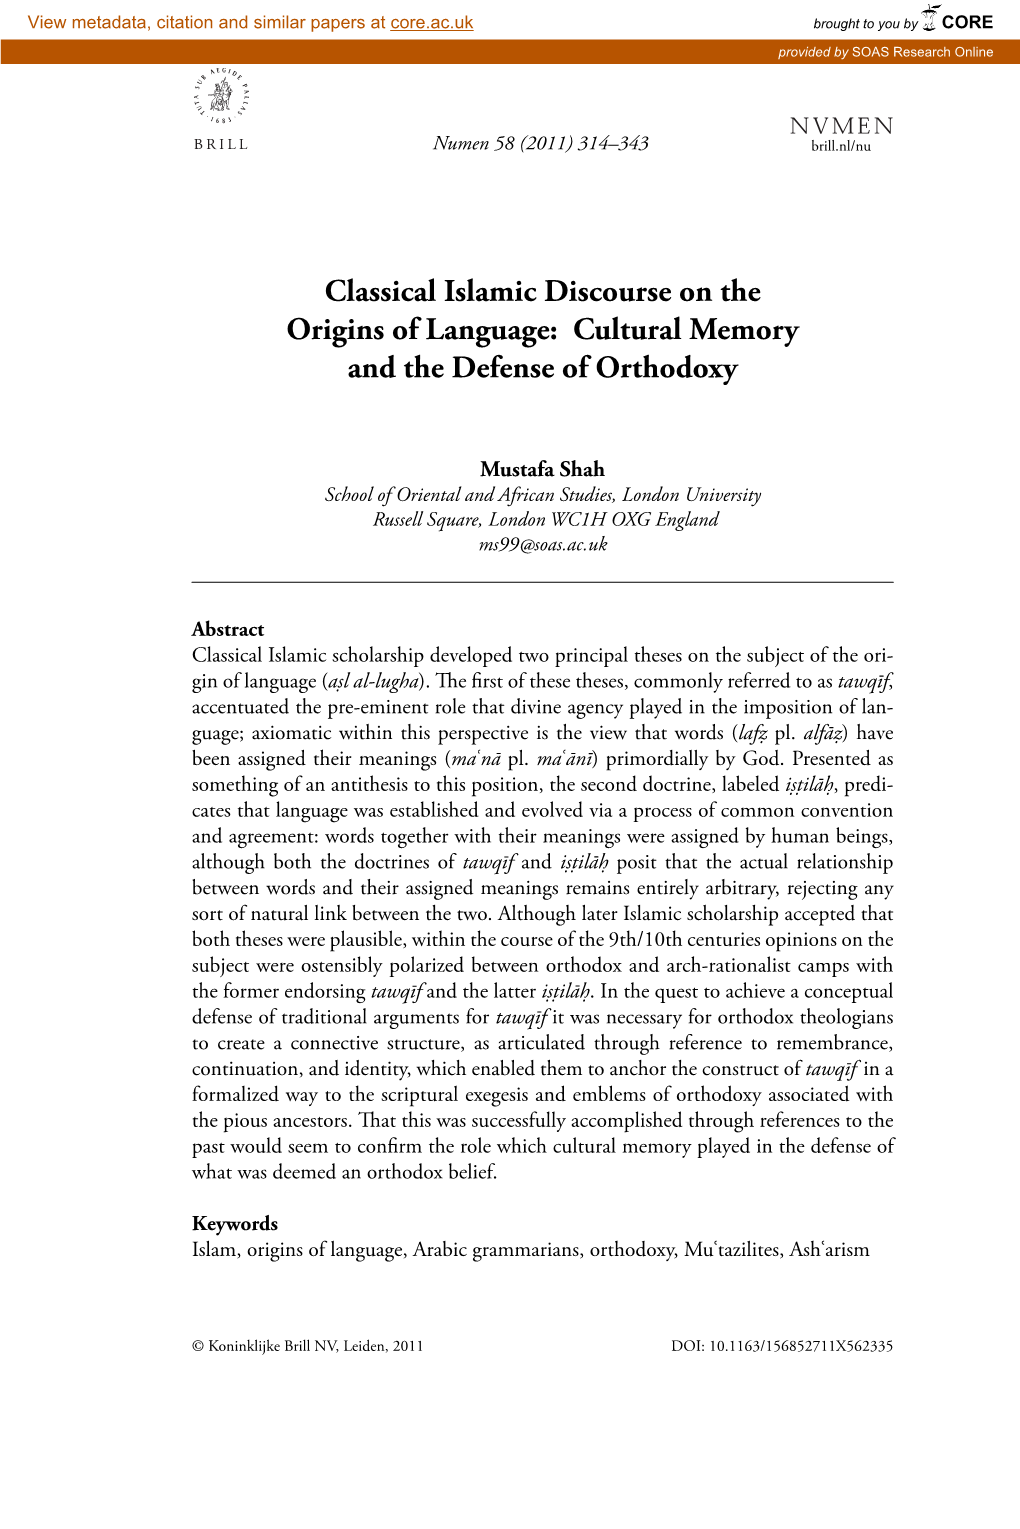 Classical Islamic Discourse on the Origins of Language: Cultural Memory and the Defense of Orthodoxy